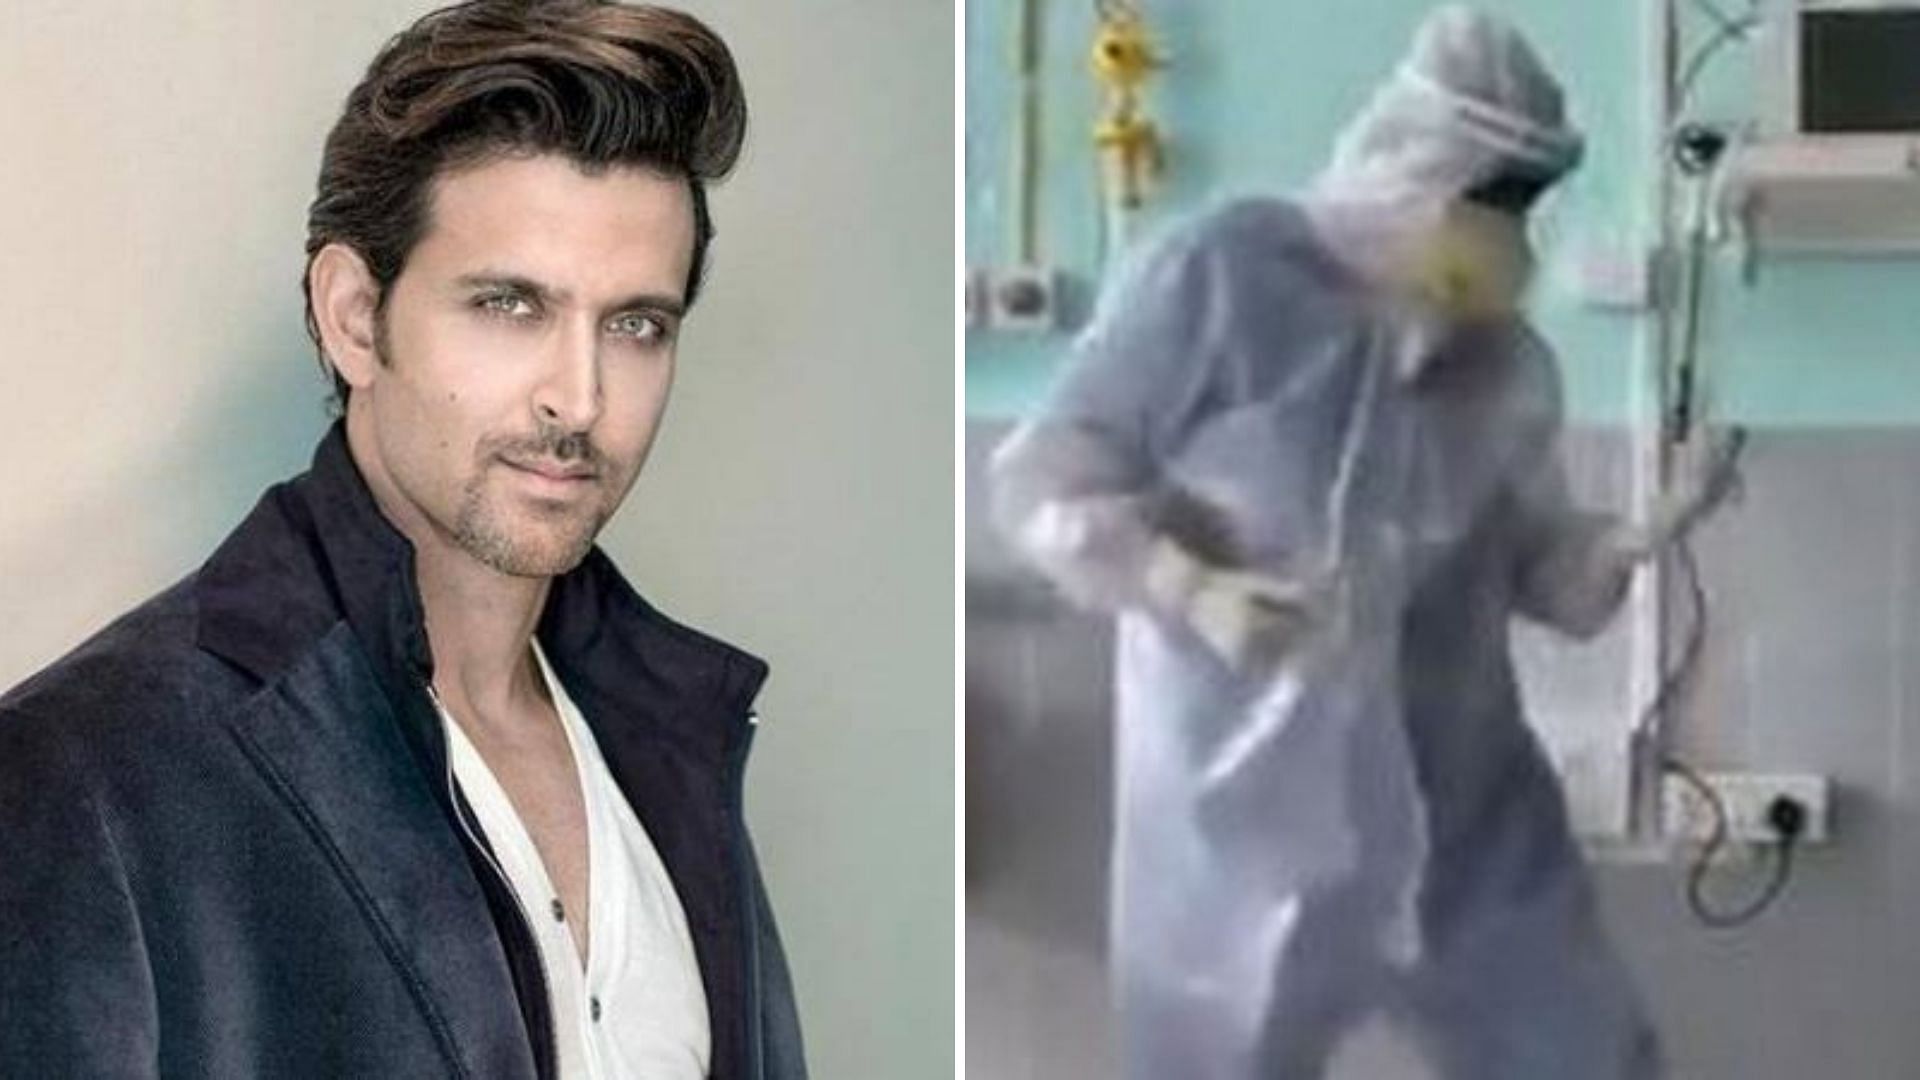 Hrithik Roshan reacts to a viral video of a doctor.